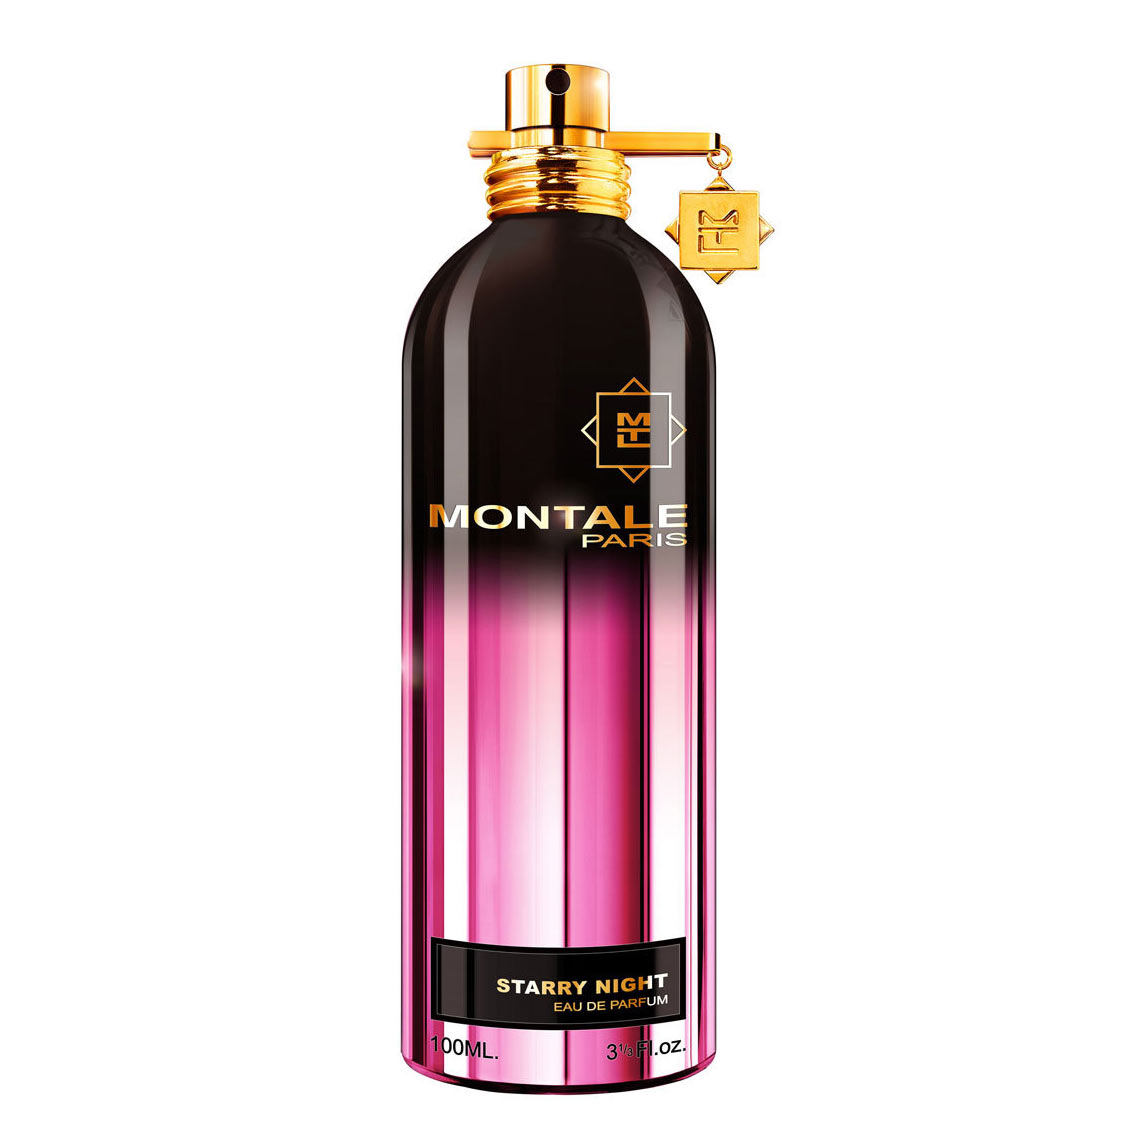 Starry Nights Montale Image